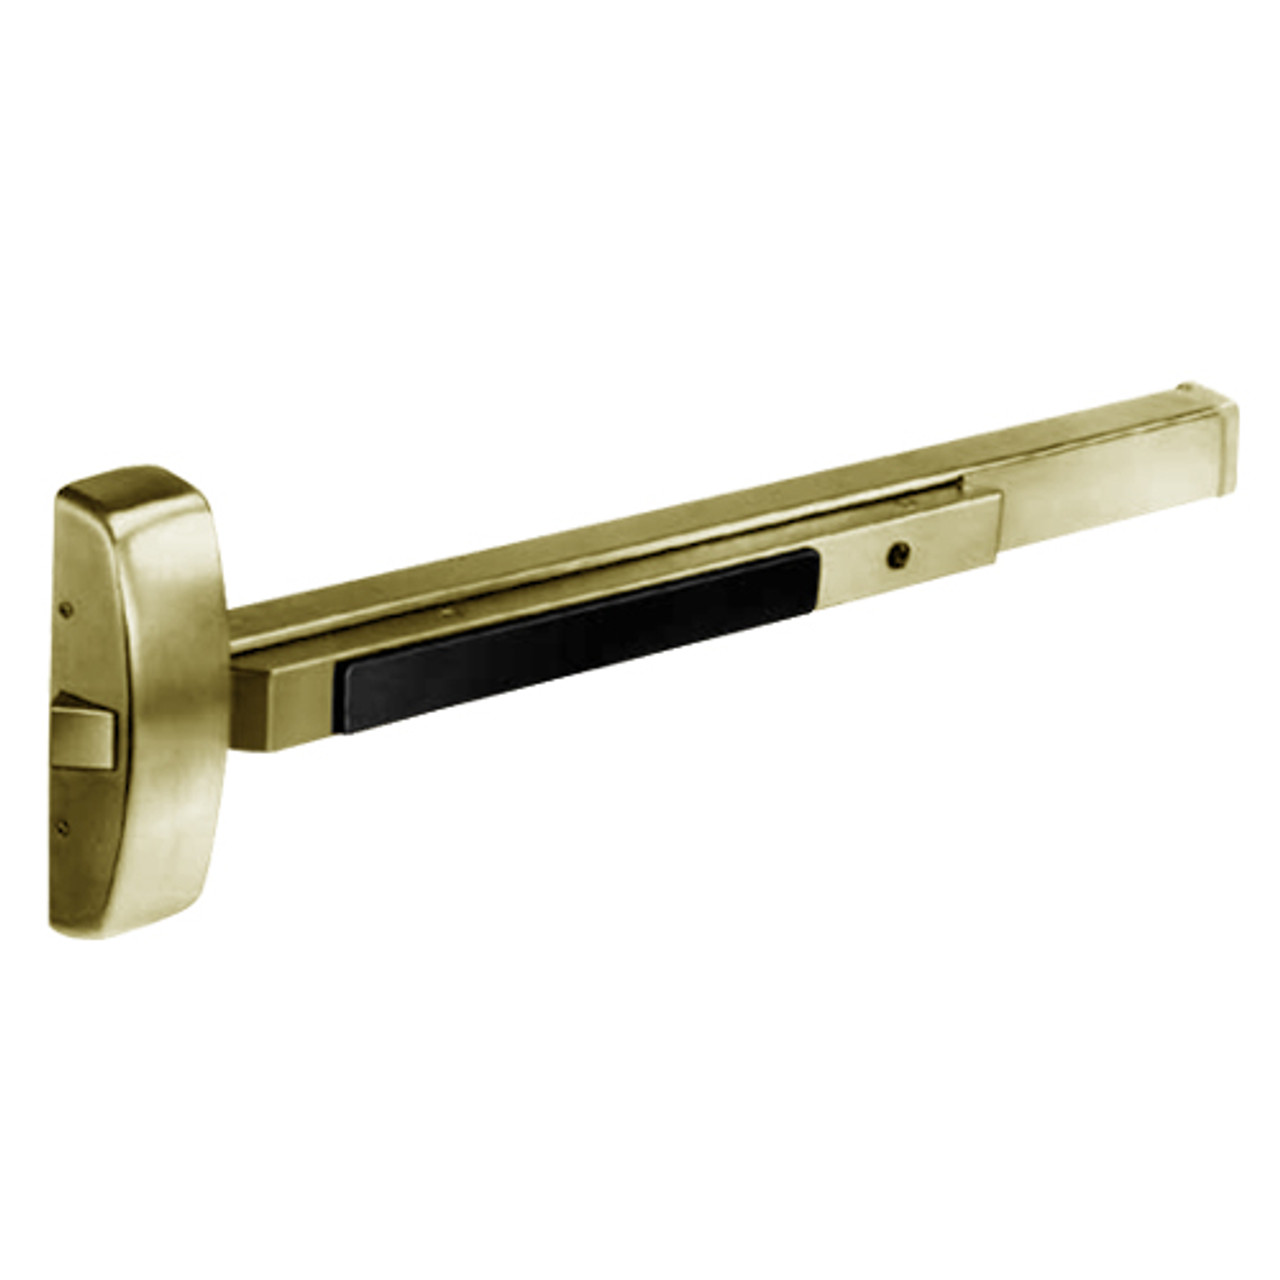 8810J-04 Sargent 80 Series Exit Only Rim Exit Device in Satin Brass